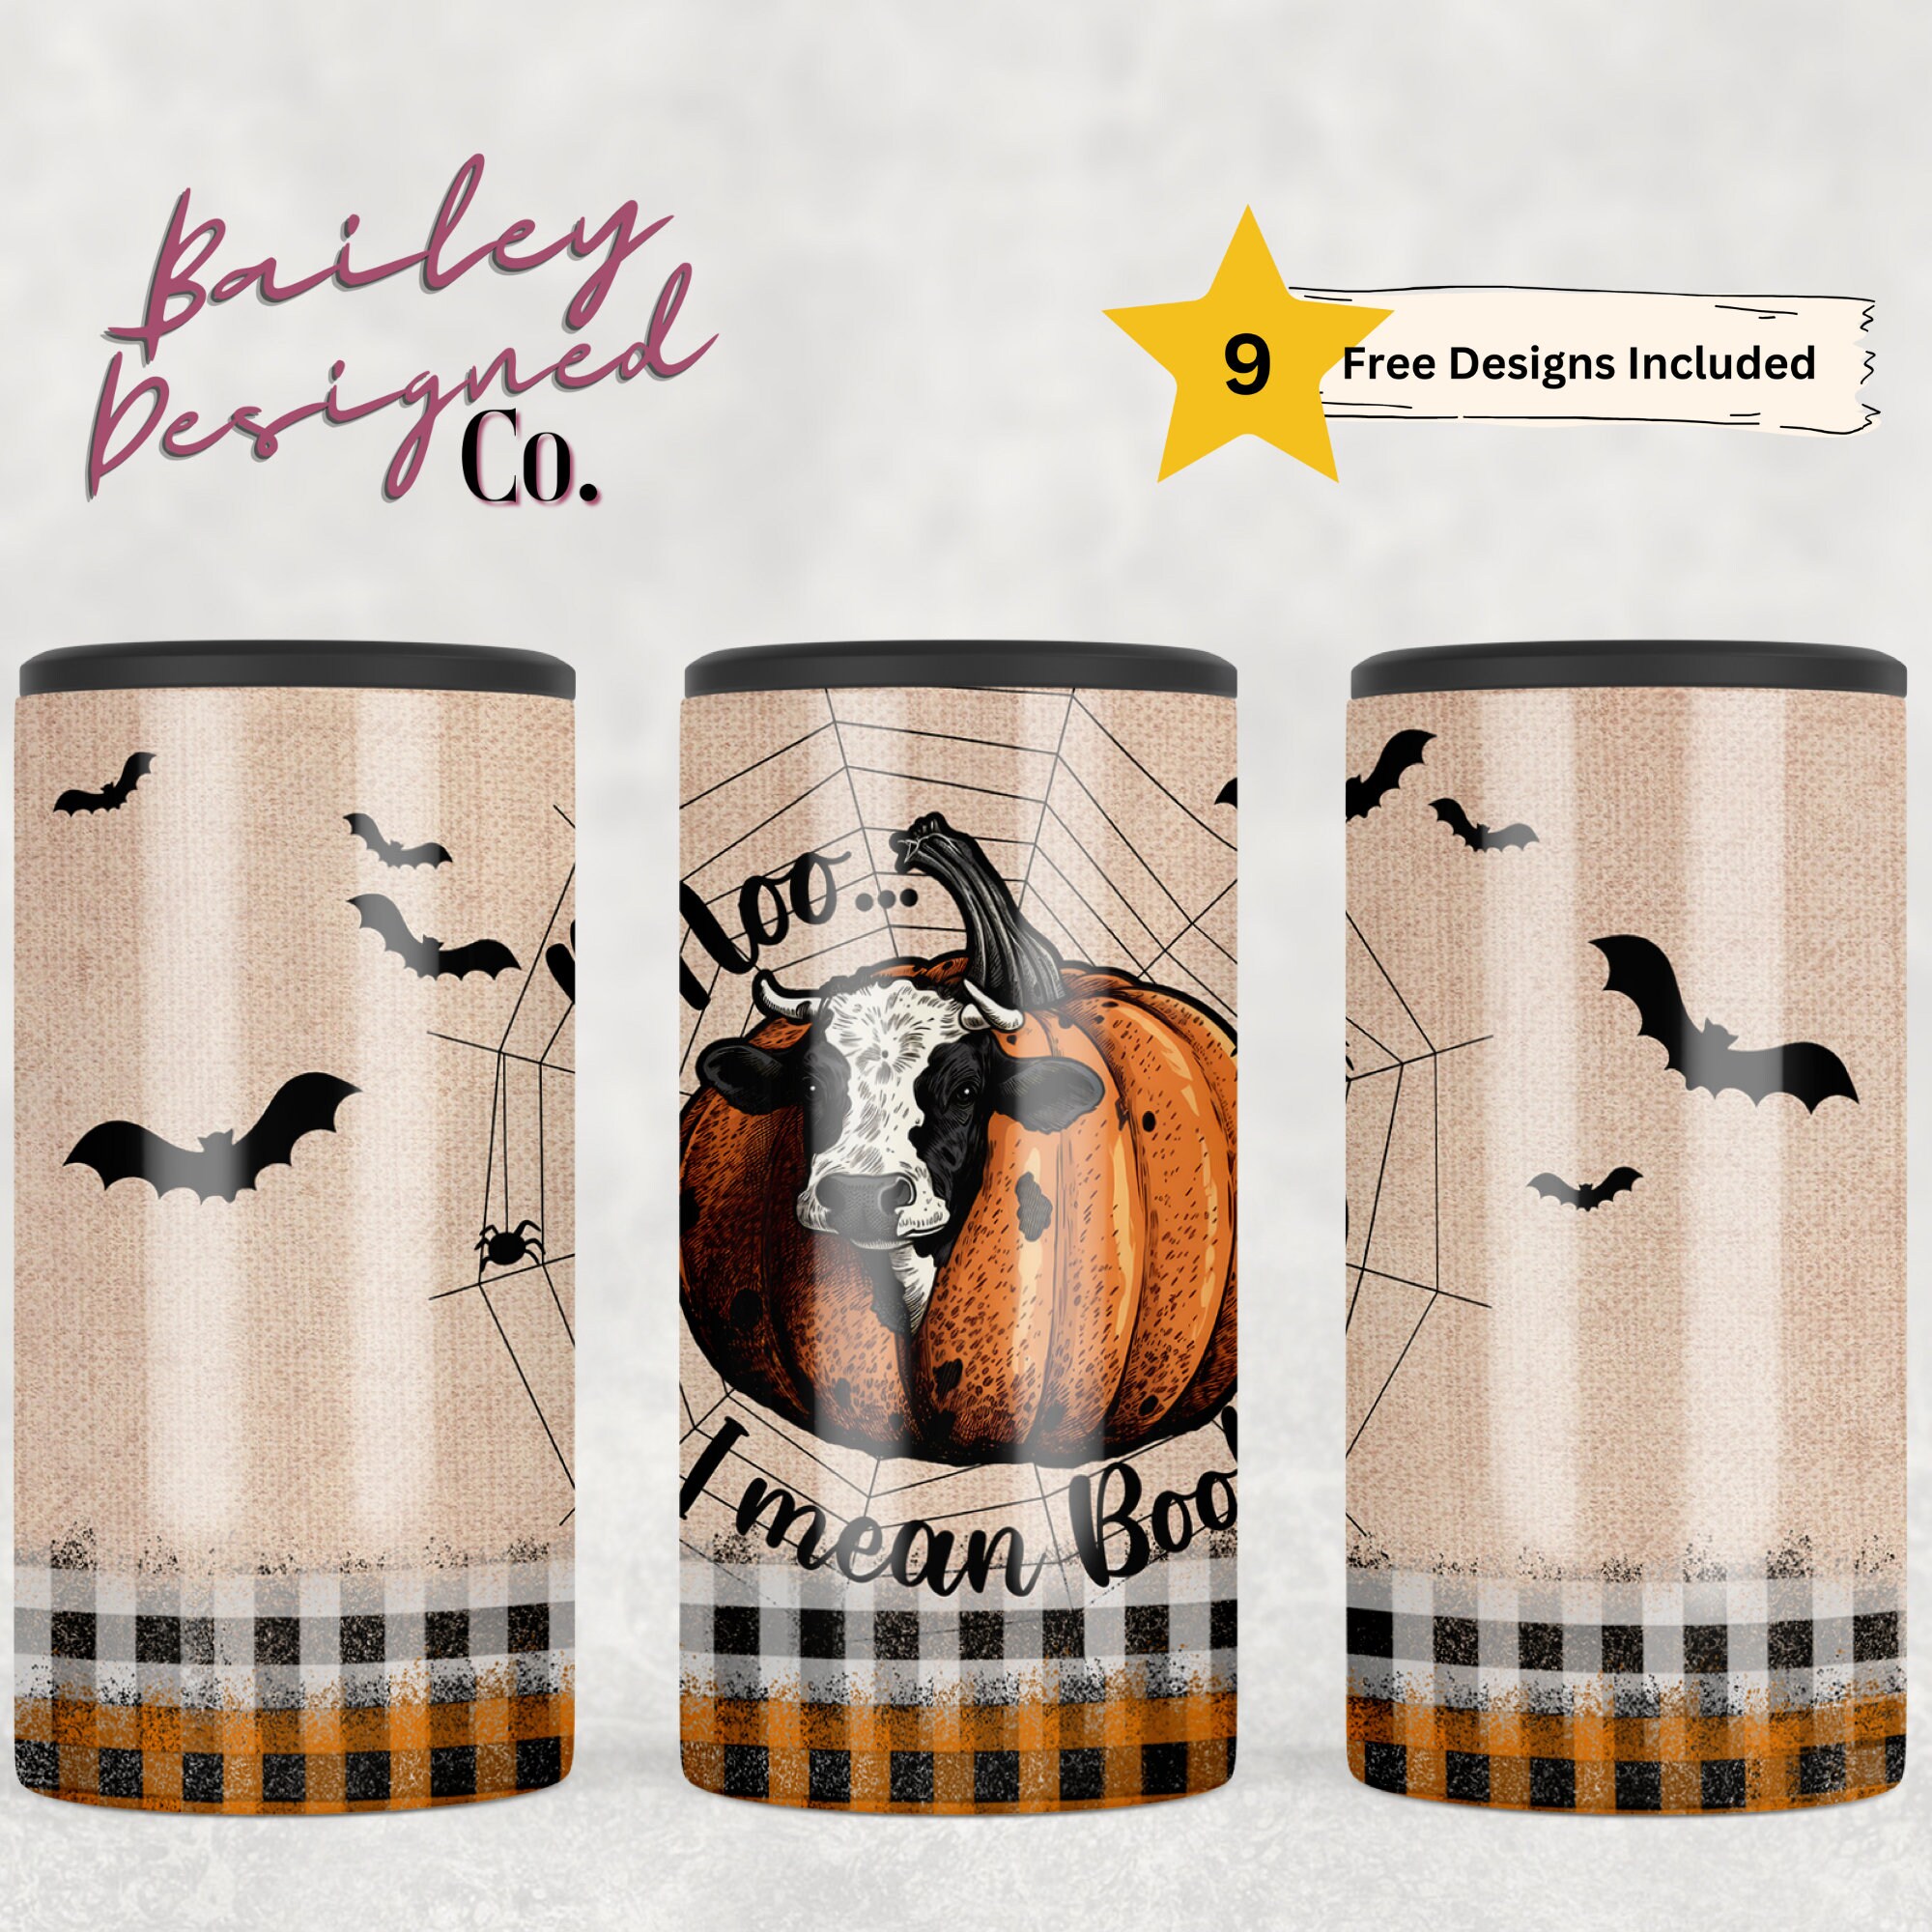 Moo I Mean Boo 4in1 Can Cooler Sublimation Wrap, lustiger